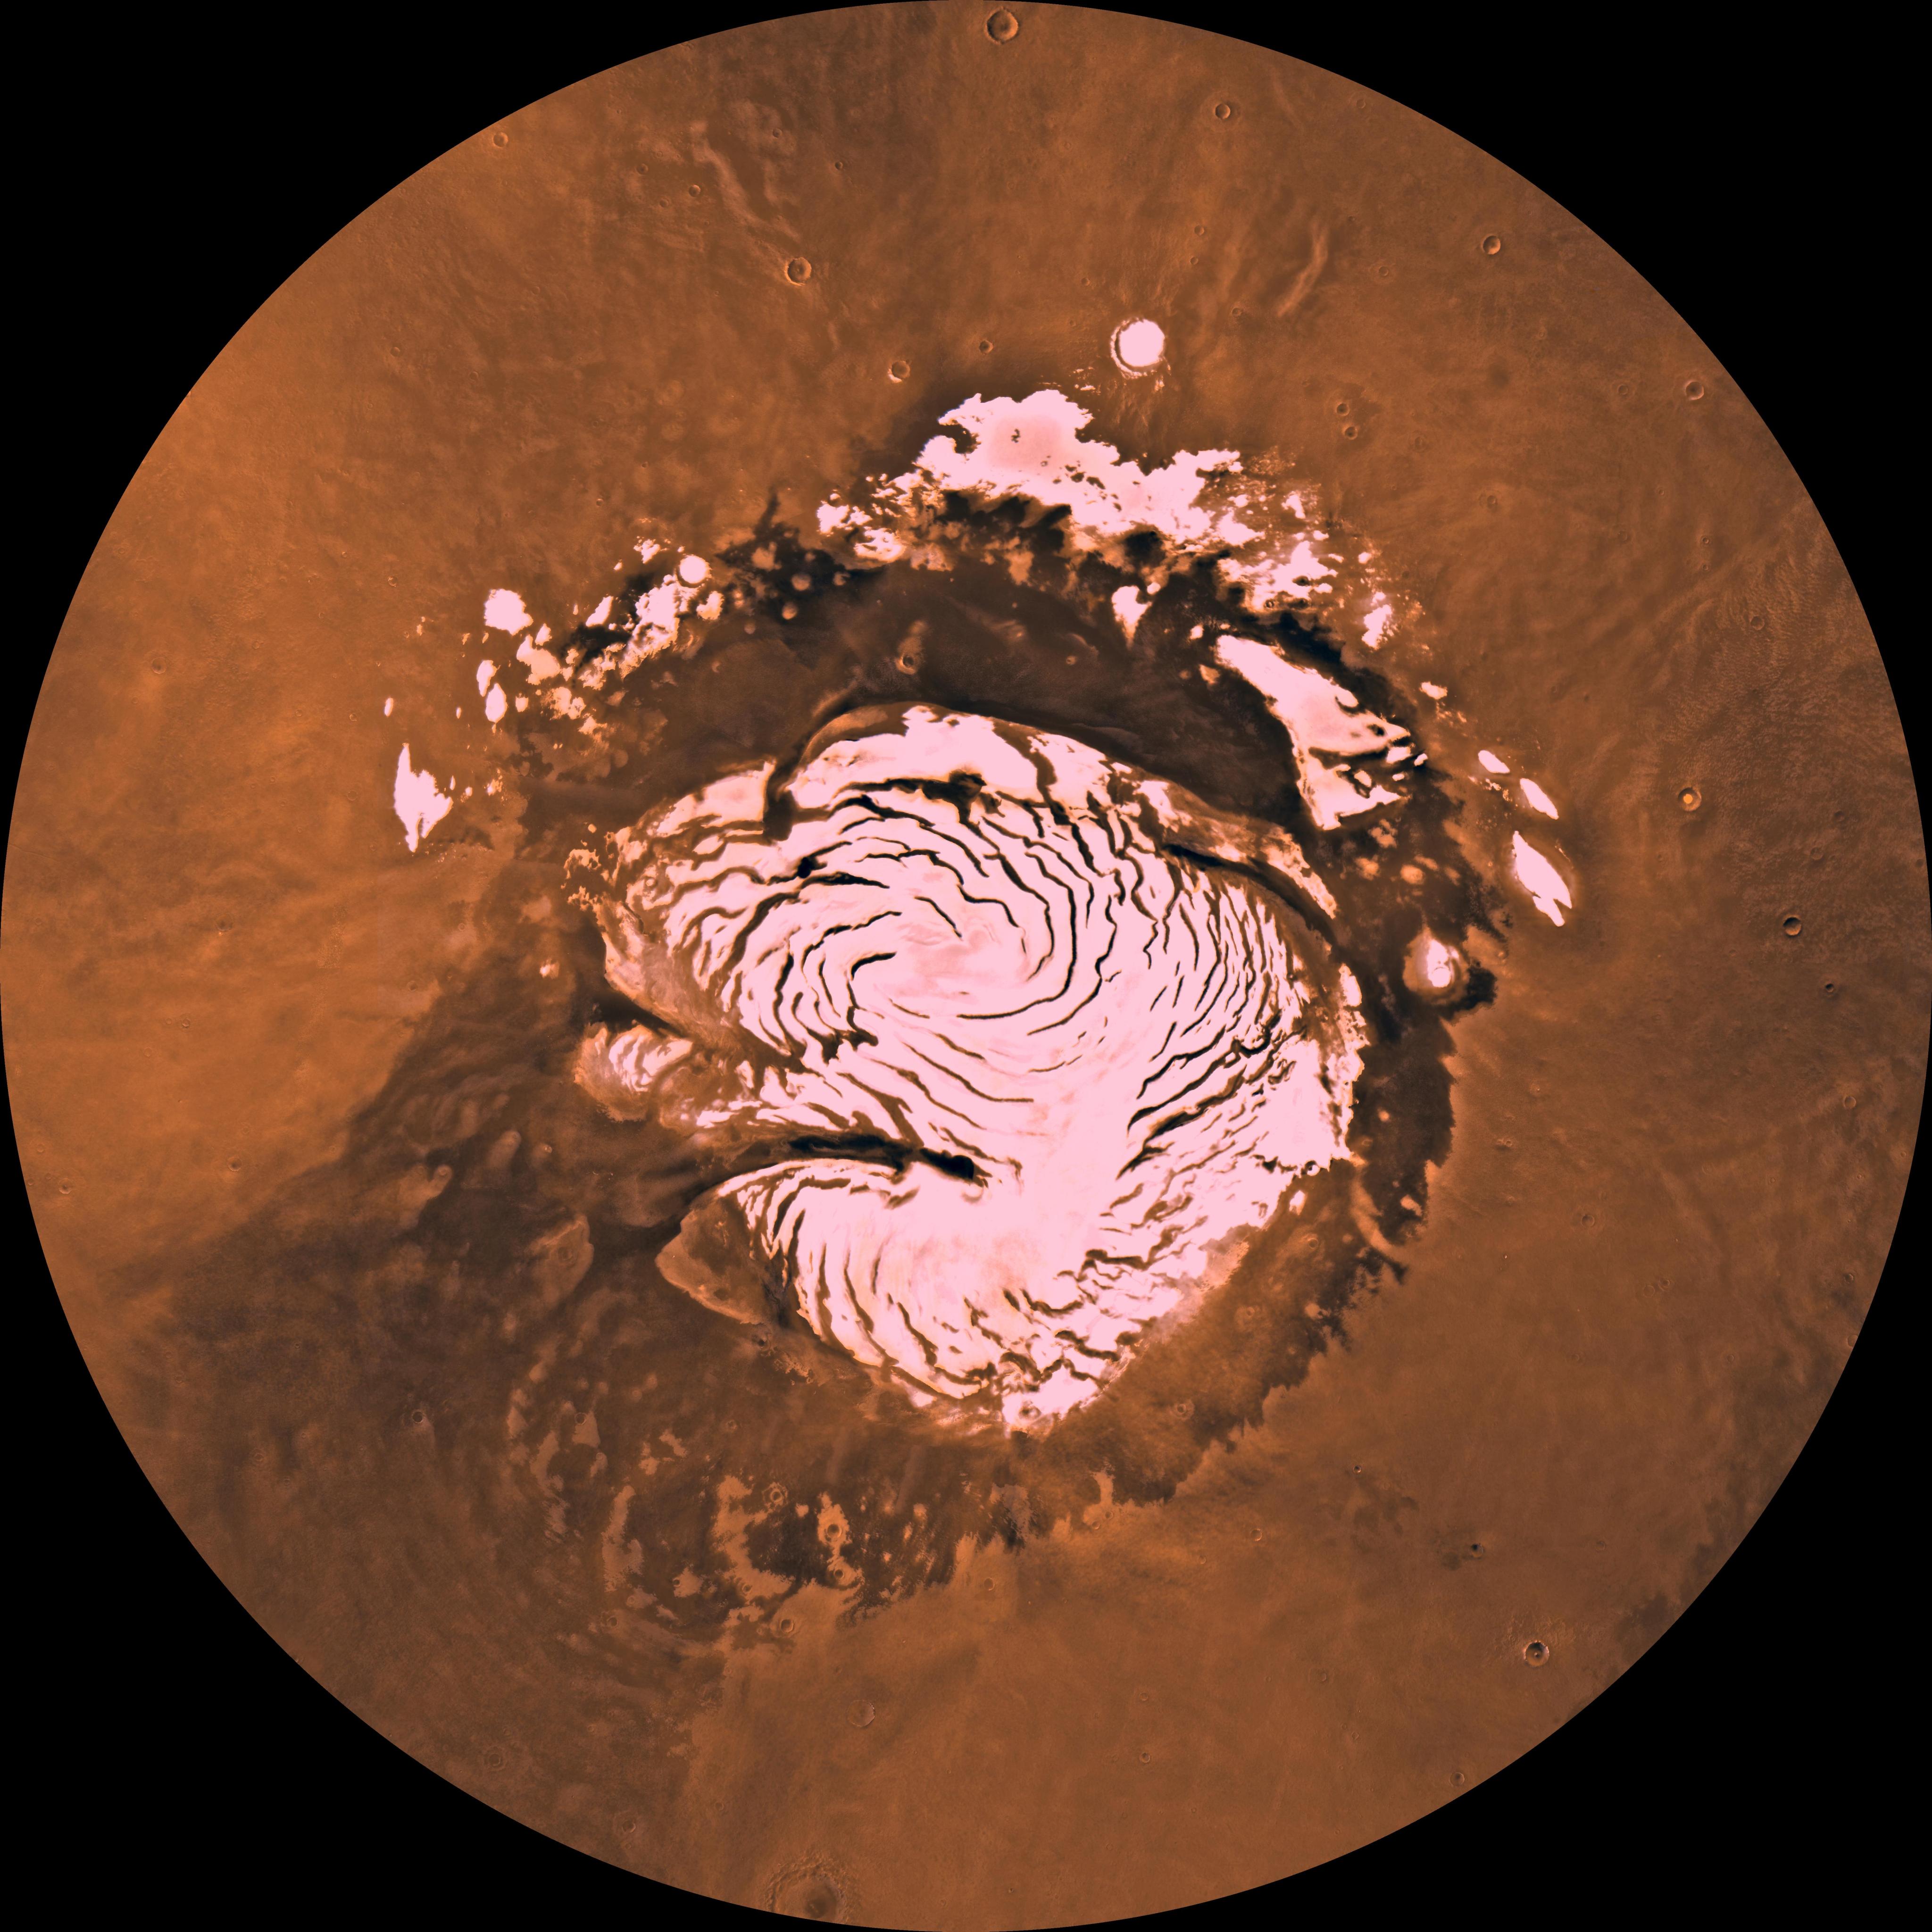 A swirling icecap stands out from the reddish Martian surface in this mosaic of images taken from orbit.